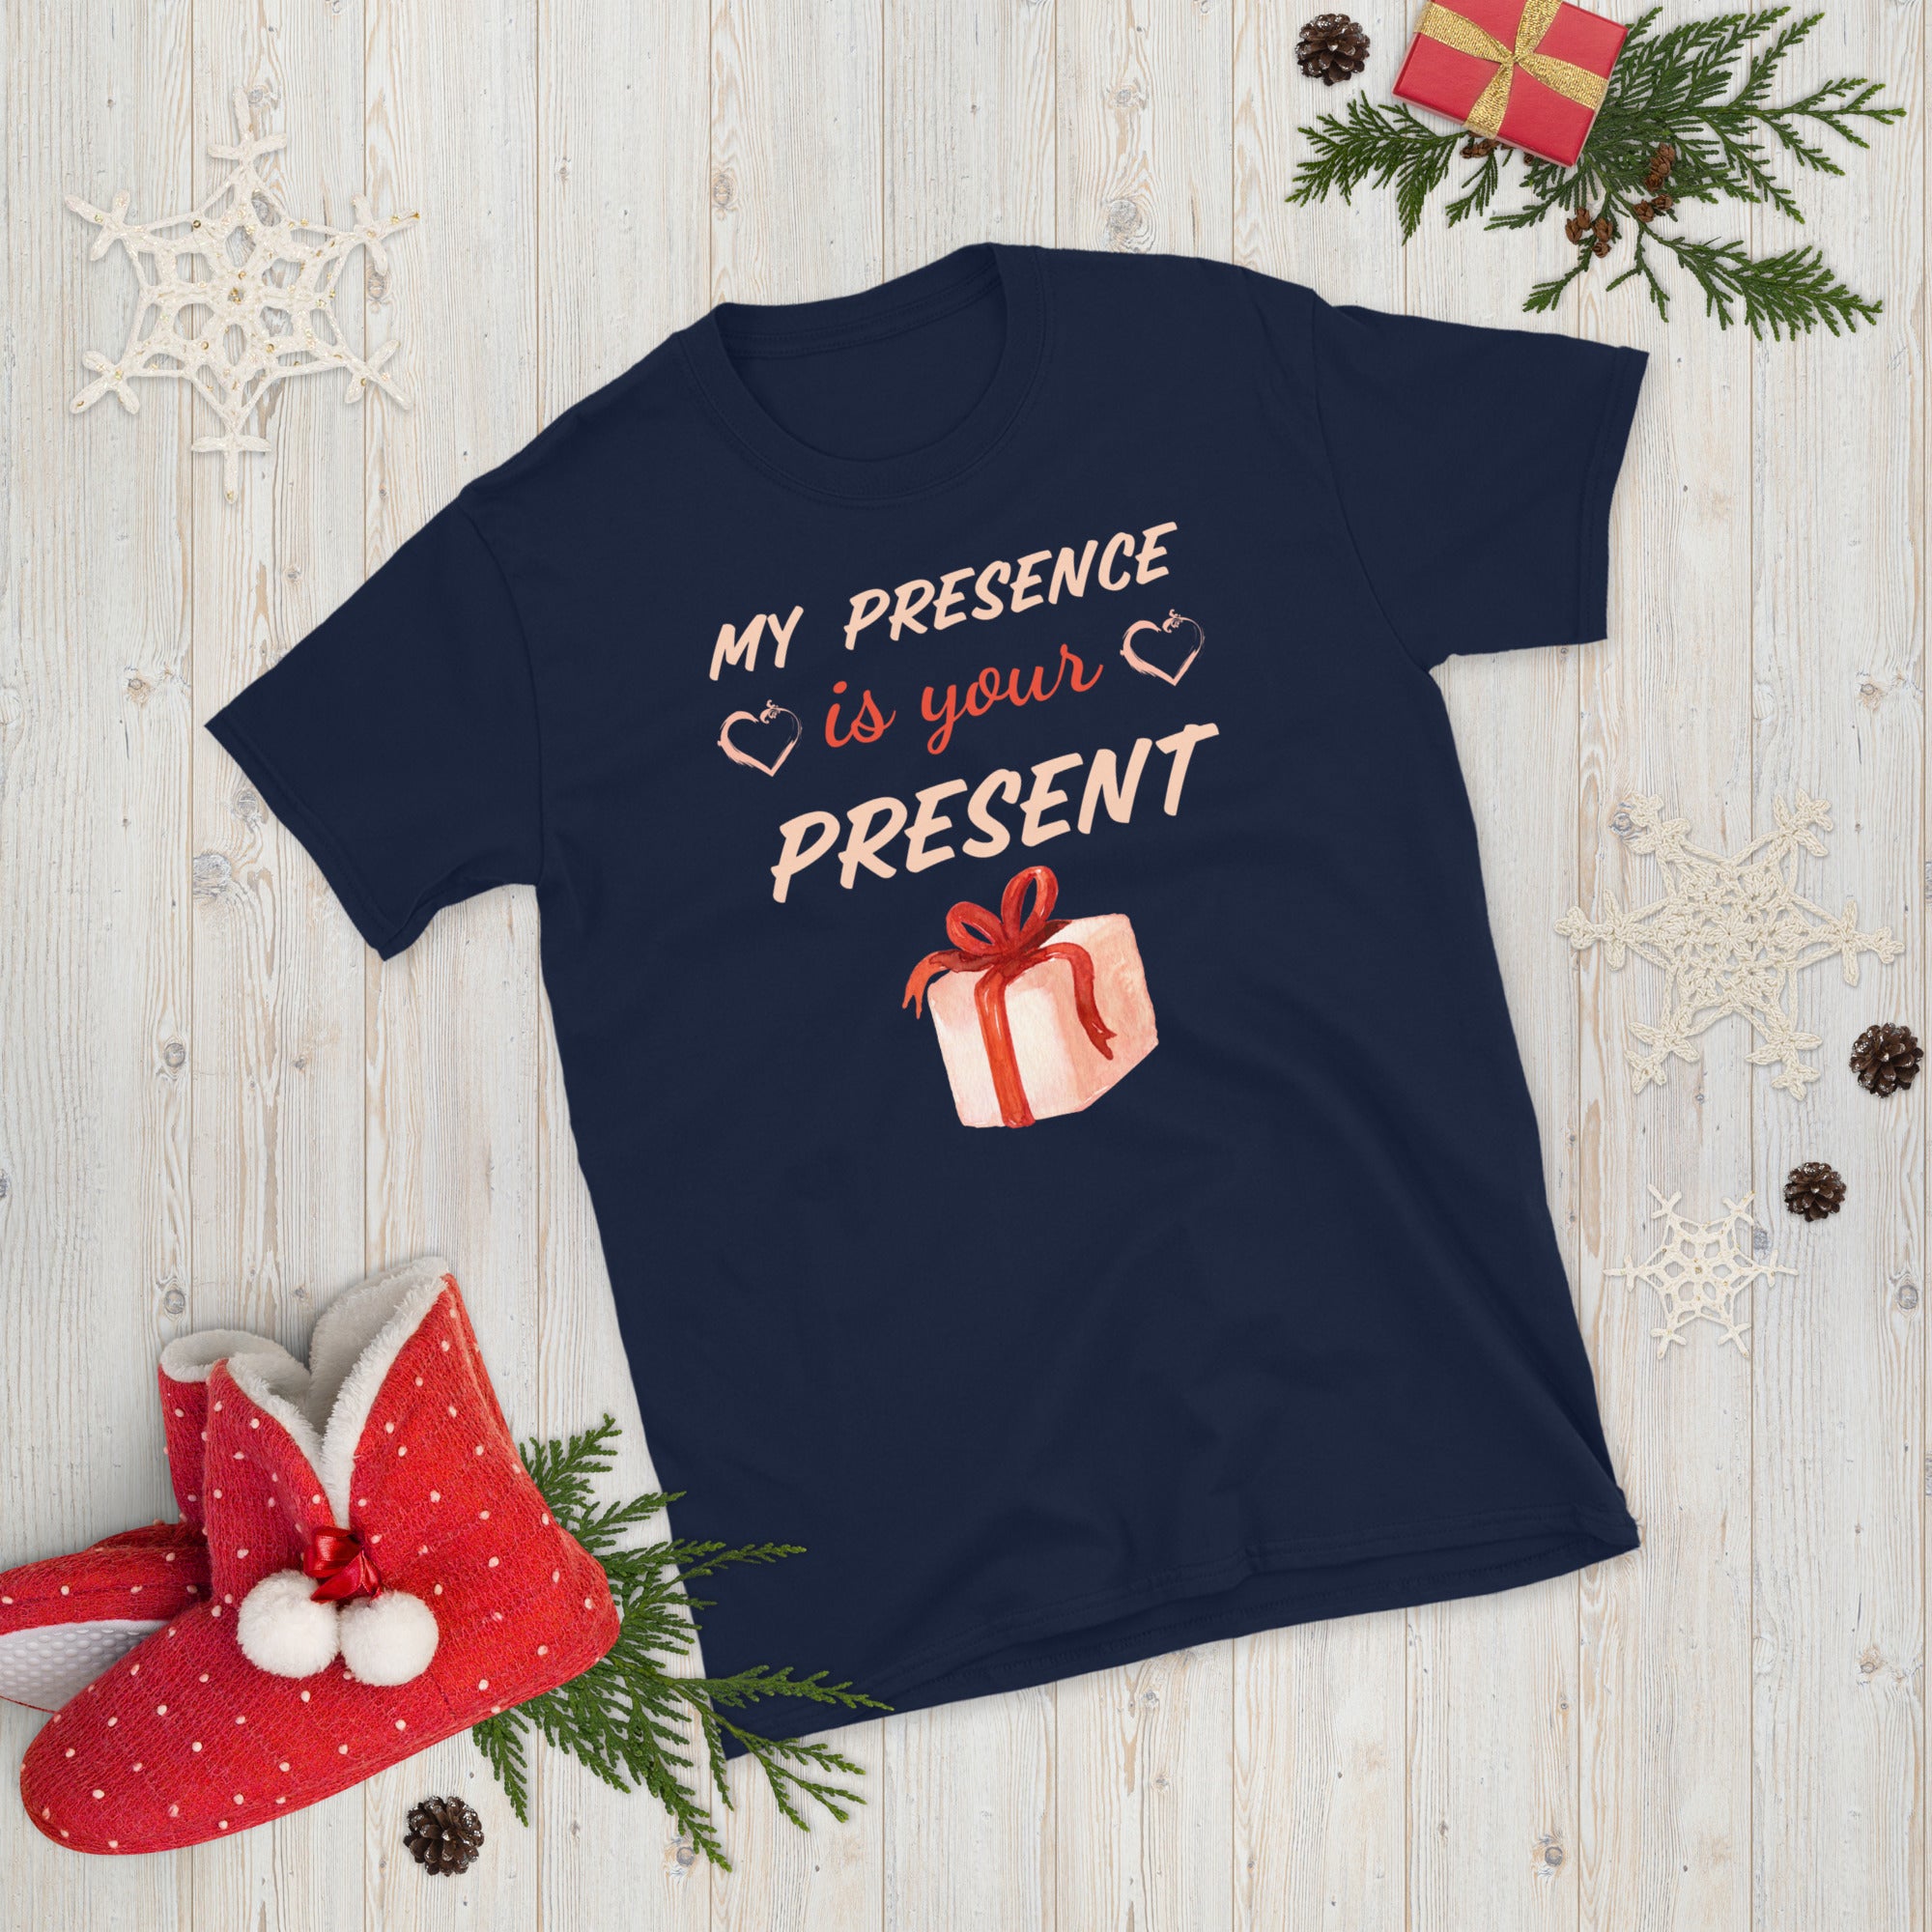 My Presence Is Your Present Shirt,Christmas Shirt for Women,Merry and Bright, Funny Xmas Shirt,Cute Party Shirt, New Year Tee, Xmas Pajamas